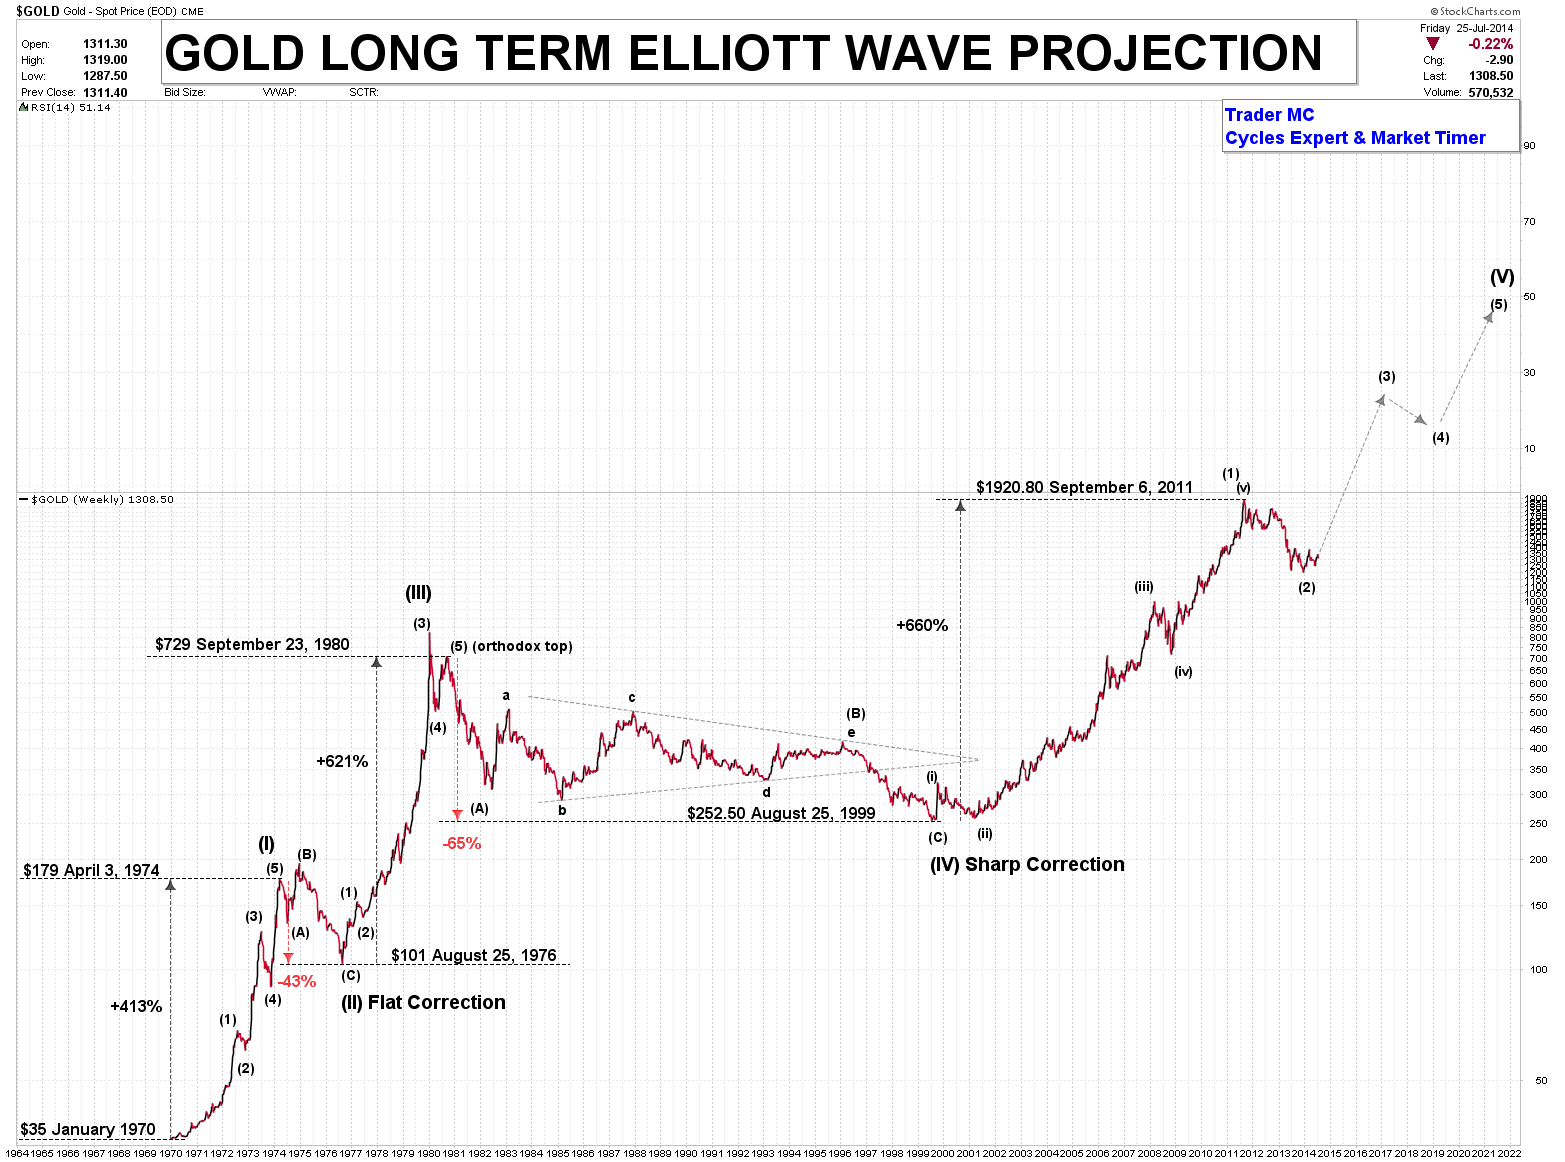 Gold's Long-Term Projection